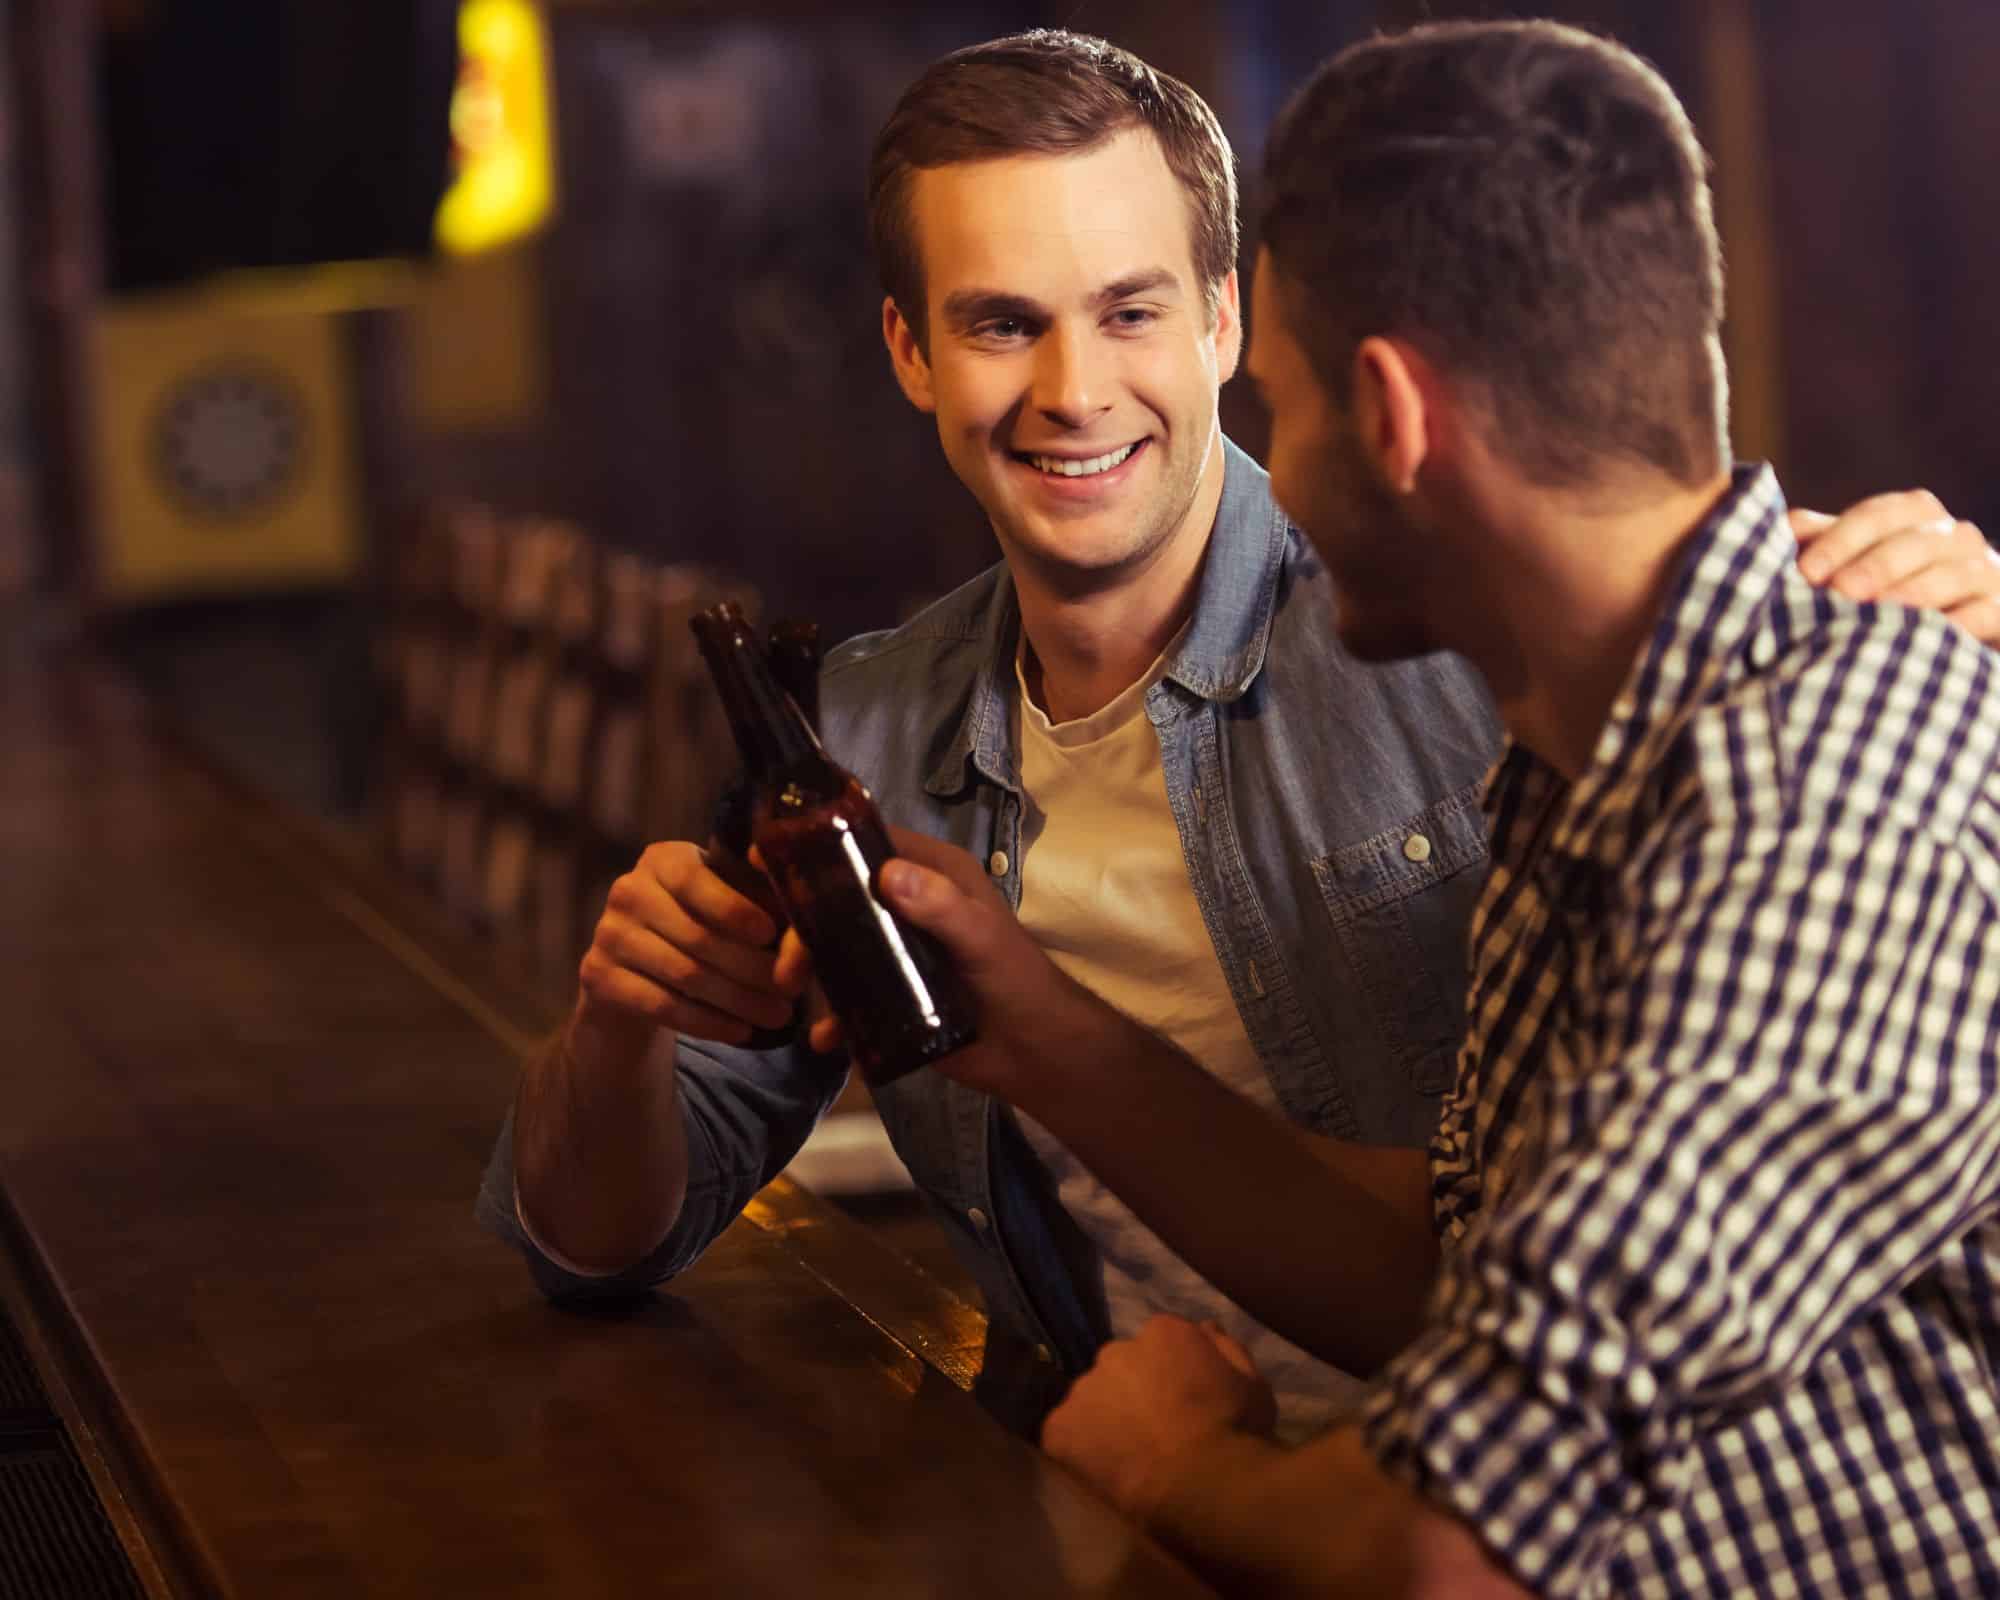 are men more likely to abuse drugs and alcohol